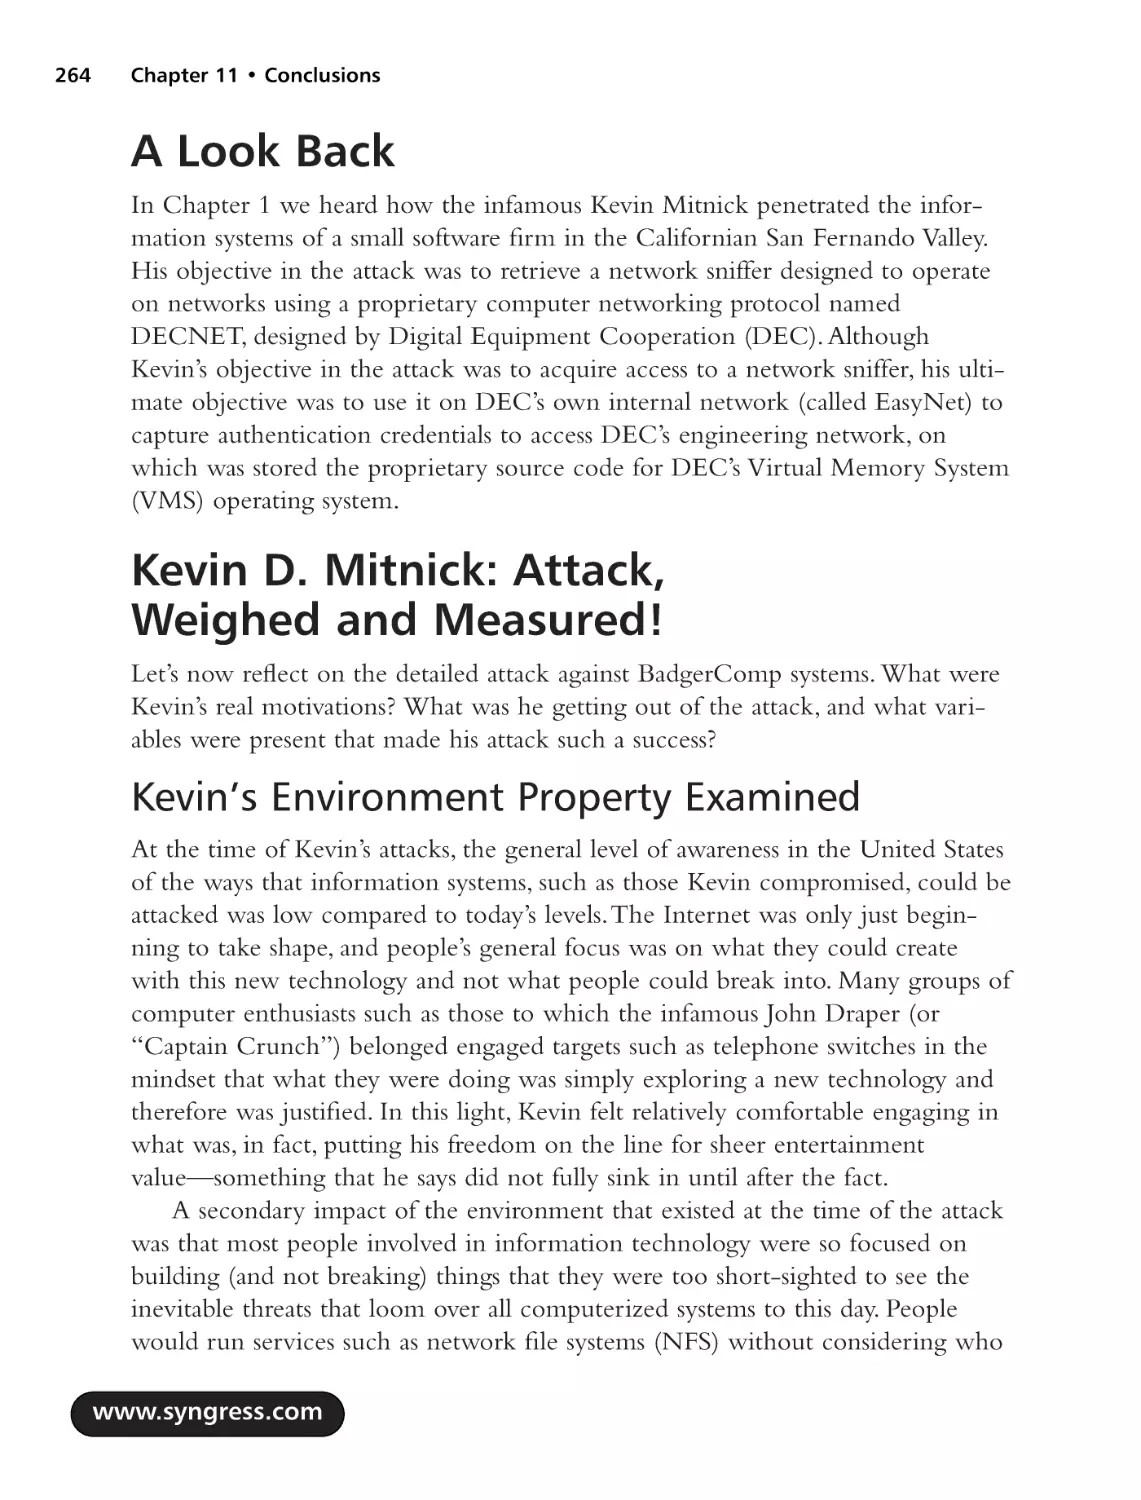 A Look Back
Kevin D Mitnick
Kevin's Environment Property Examined